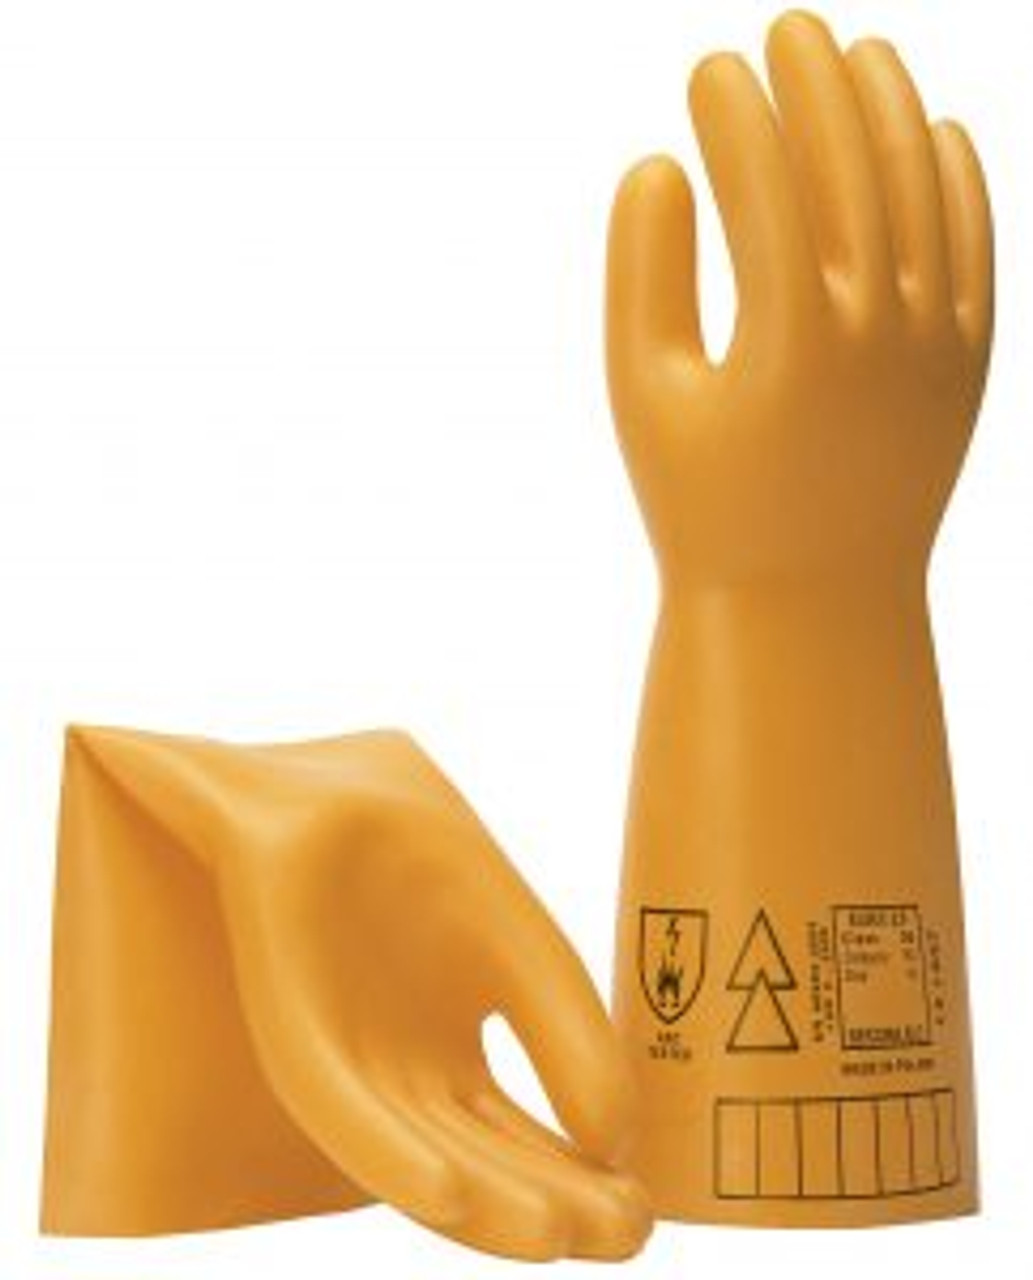 Electrical Insulating Glove, 500V, 2.5Kv Class 00 - Size 12